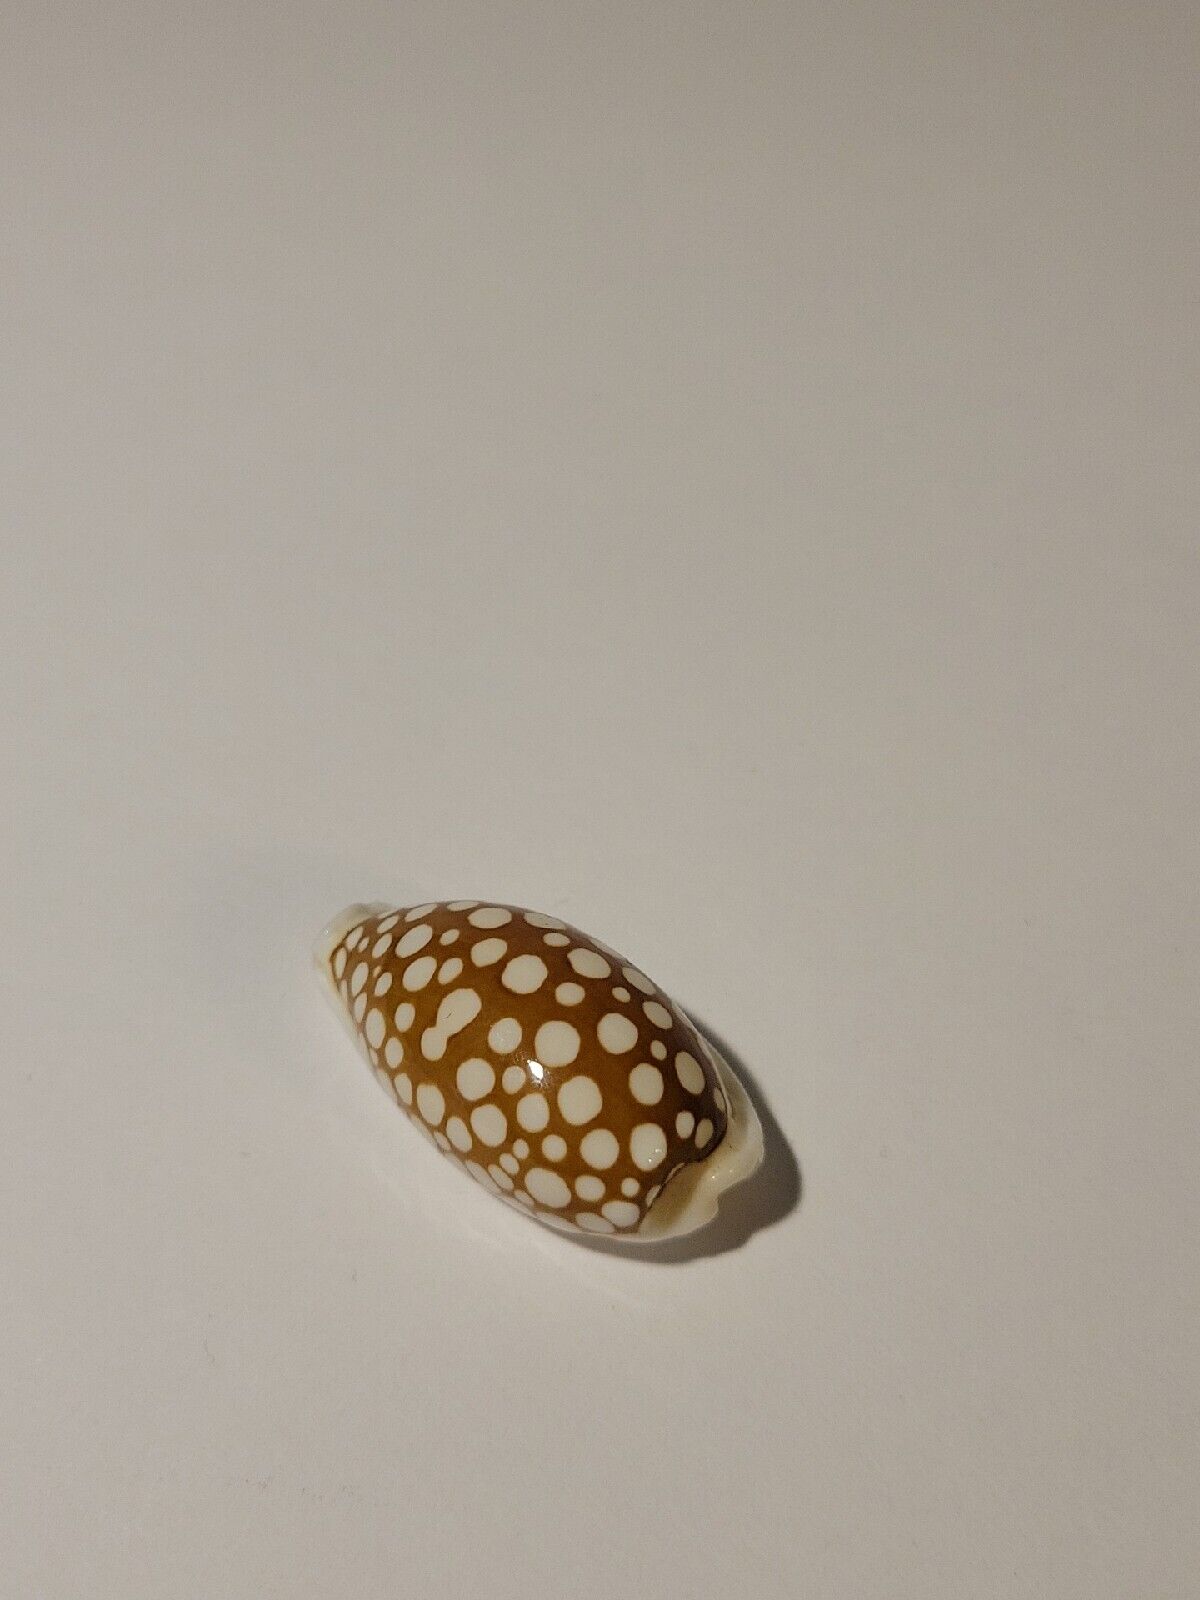 Hand Picked Cowry Shell - Cribraria